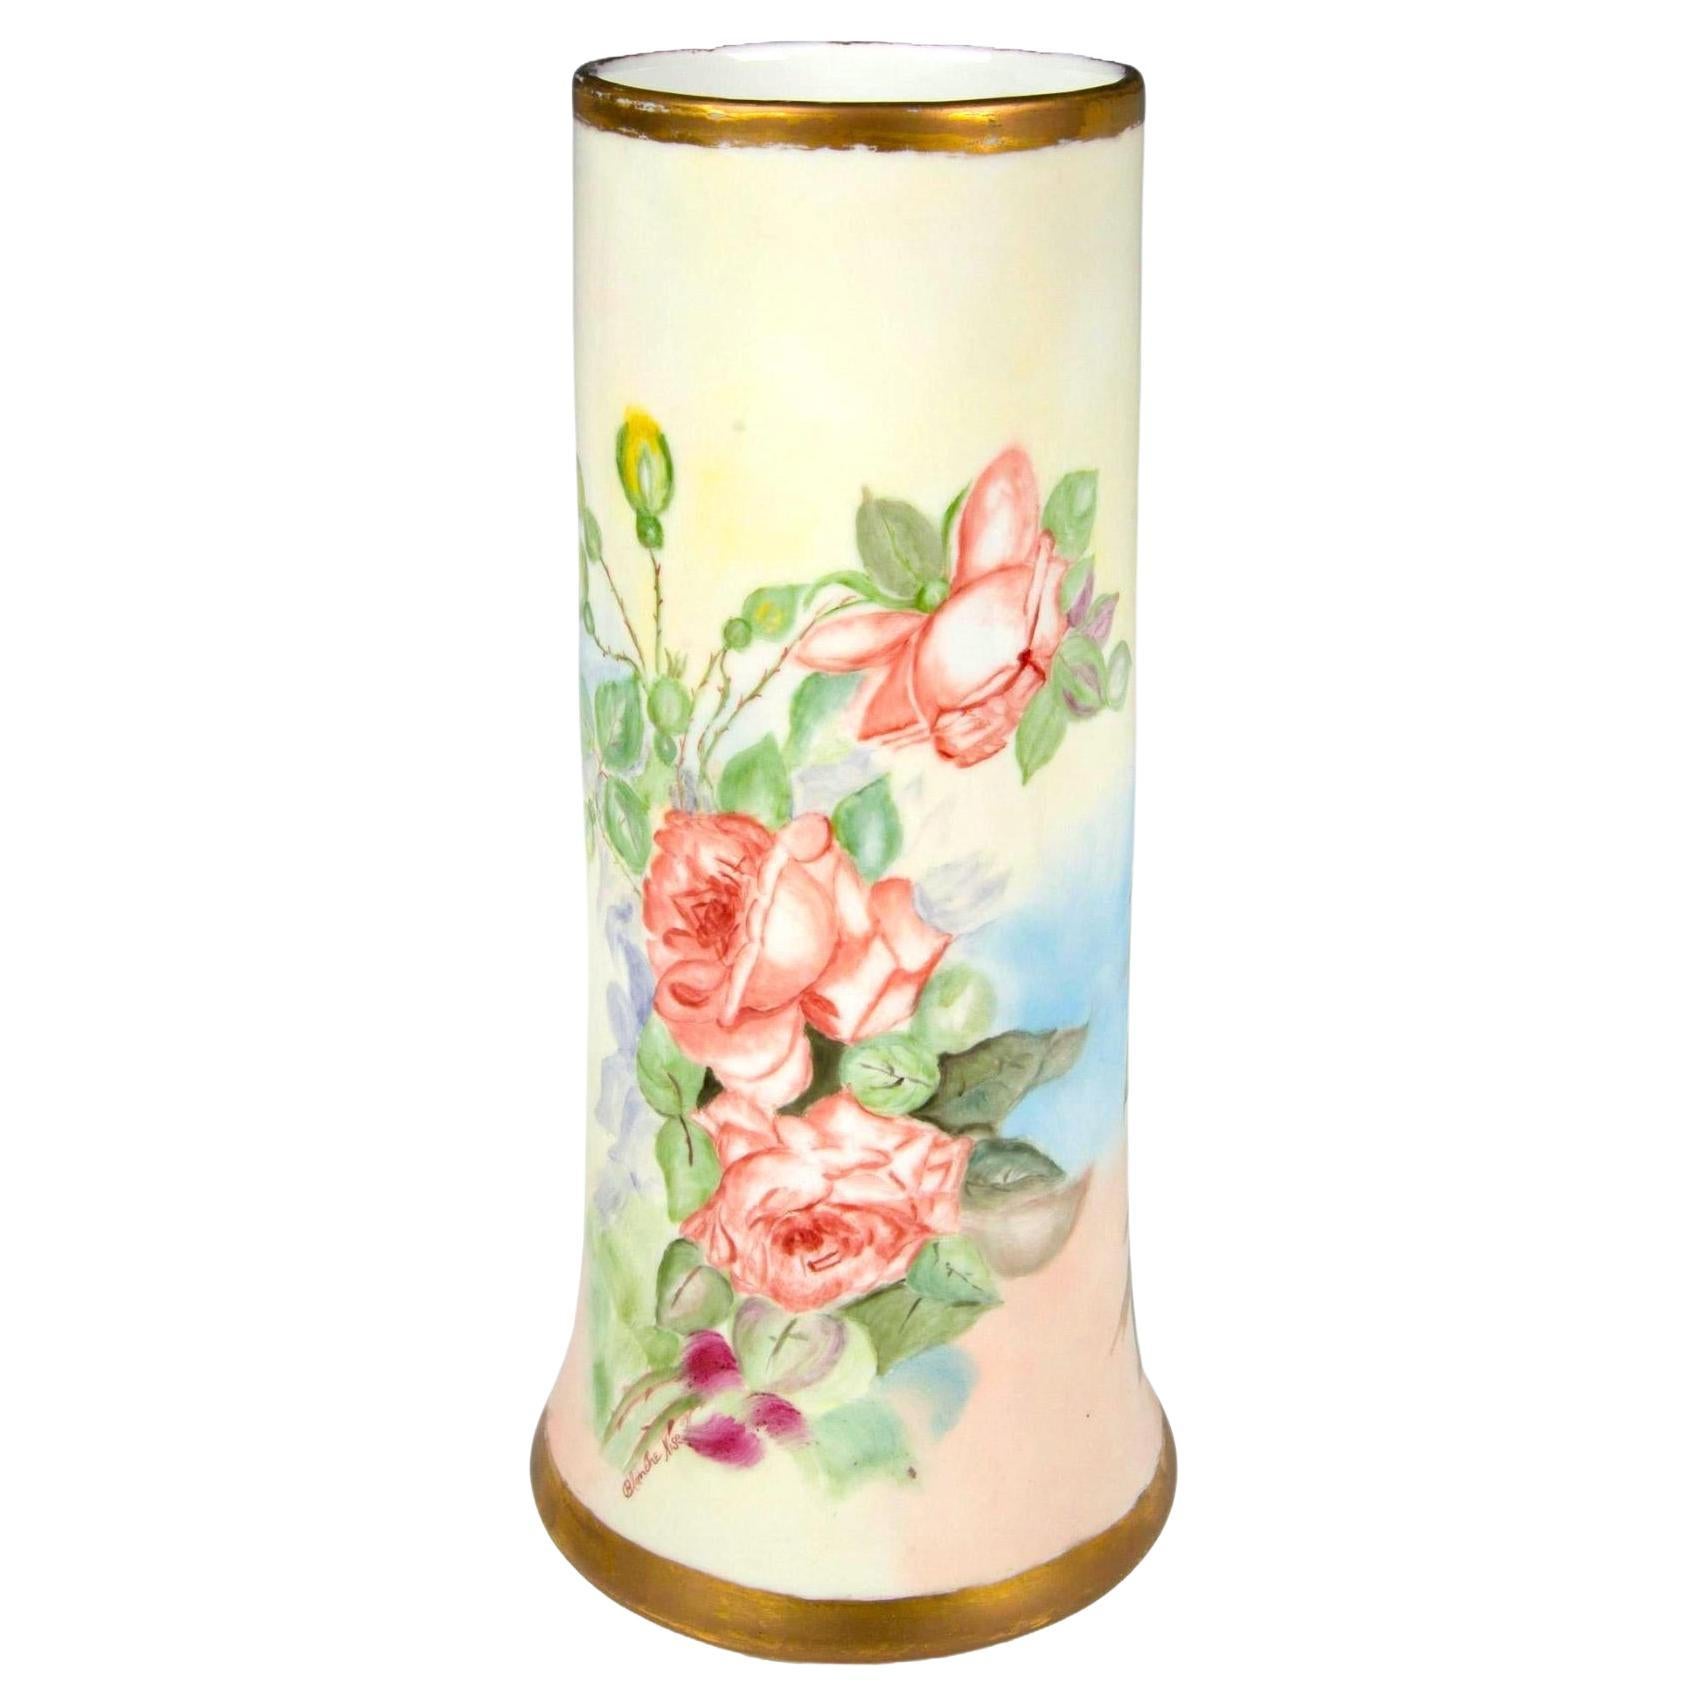 Introducing a magnificent antique porcelain vase from Limoges, France, crafted by D&C and hand-painted with intricate floral designs. This large vase showcases a lush arrangement of hand-painted roses, highlighted by delicate gilded trims that add a